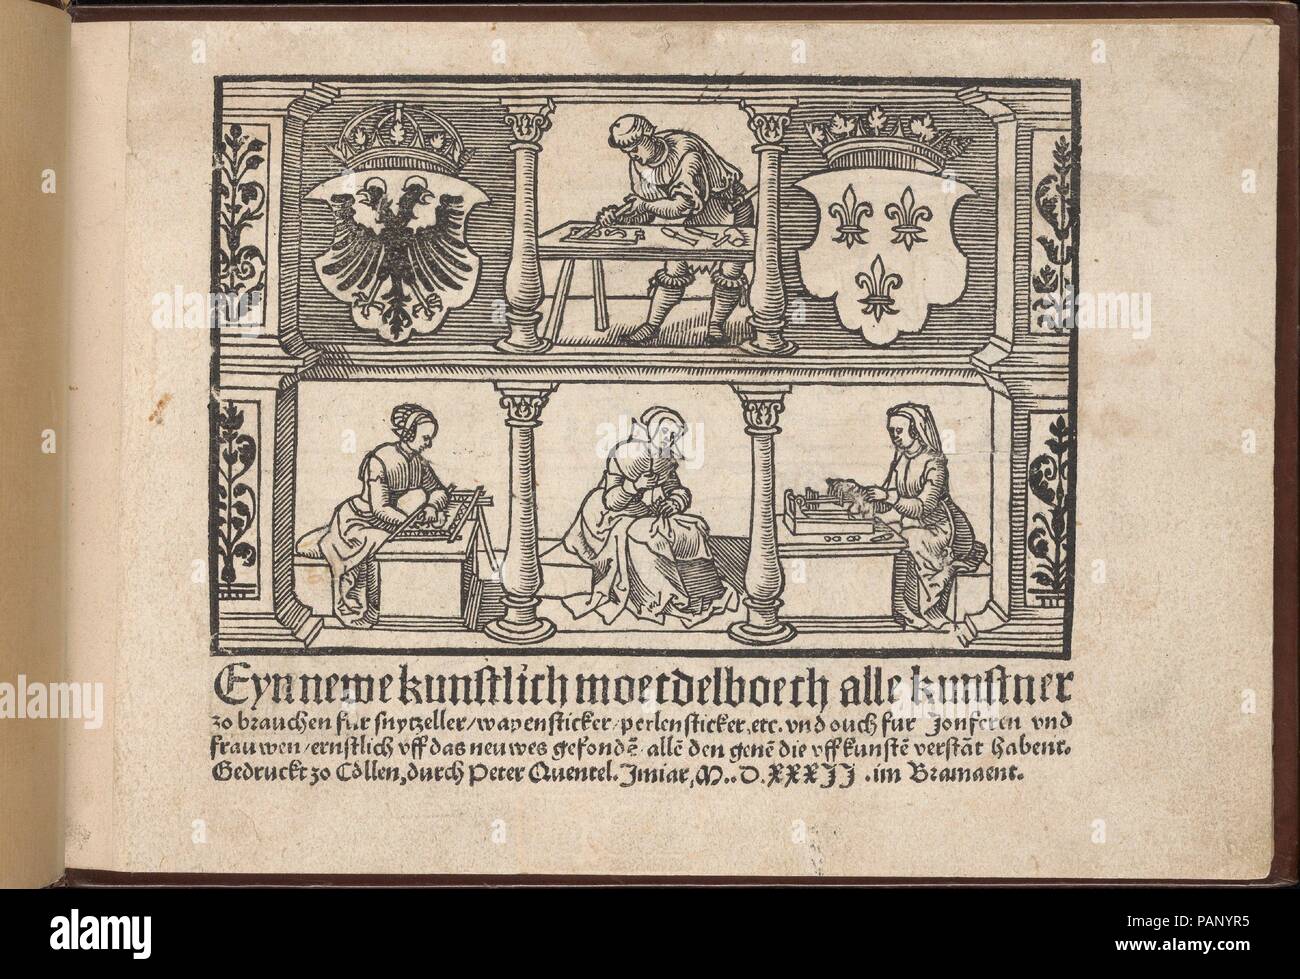 Eyn Newe kunstlich moetdelboech alle kunst. Dimensions: Overall: 5 11/16 x 8 1/16 in. (14.5 x 20.5 cm). Publisher: Peter Quentel (German, active Cologne, 1518-46) , Cologne. Date: 1532.  Published by Peter Guentel, Cologne.  The only  recorded copy (incomplete) of Peter Guentel's second edition of this model book. Illustrated title page and 31 pages of designs.  The first edition of this second book of Peter Guentel appeared in 1529 according to Lotz who records 2 complete copies- 24 leaves, sigs. a - f 4. Althought incomplete, this is the only recorded copy of the second edition.  A number of Stock Photo